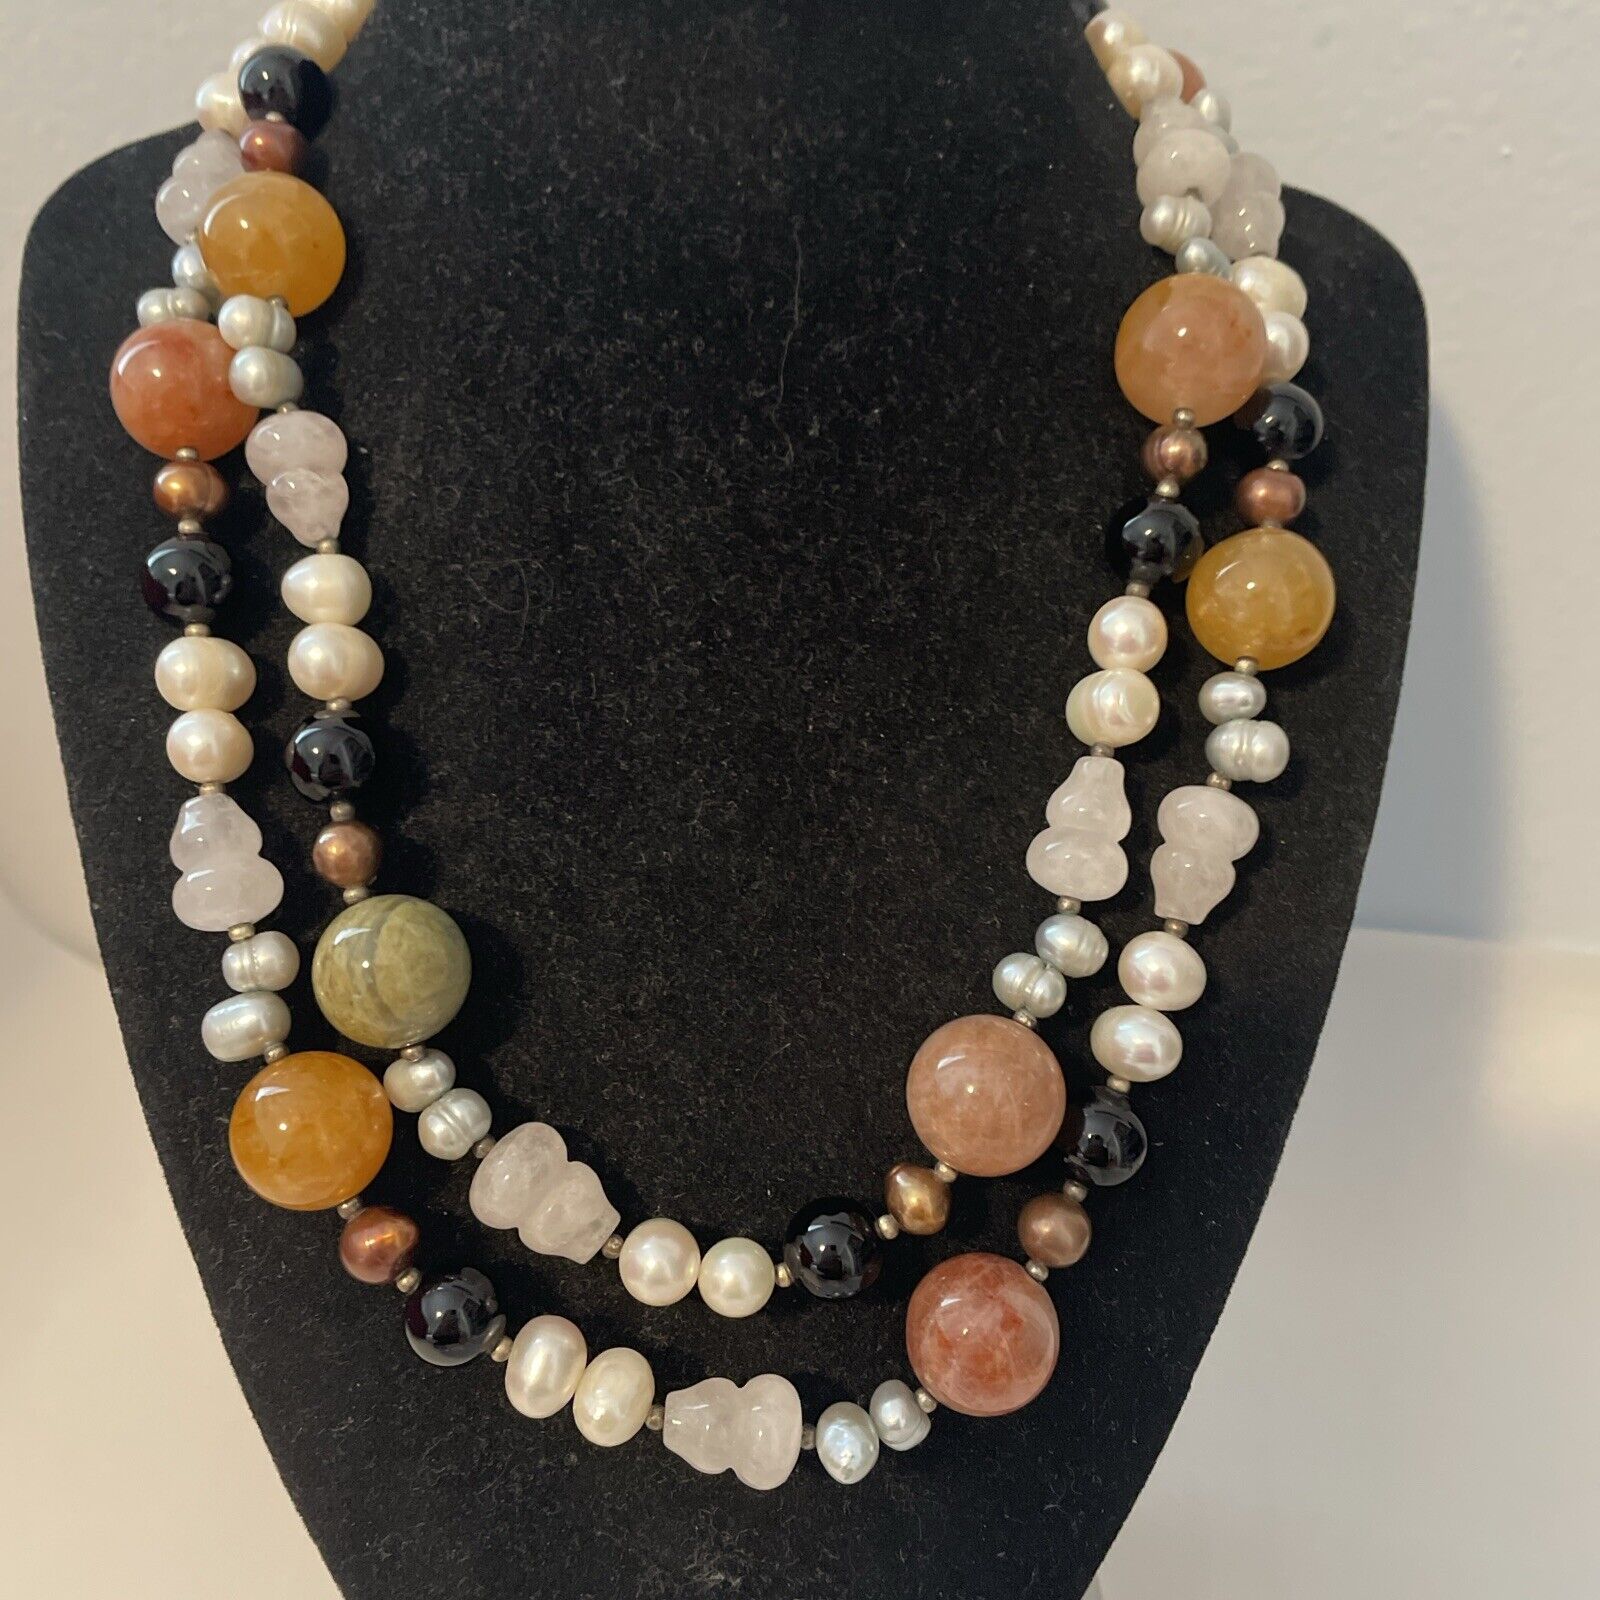 Beautiful Vintage Multi-colored Polished Agate Stone , Pearl Necklace 17”